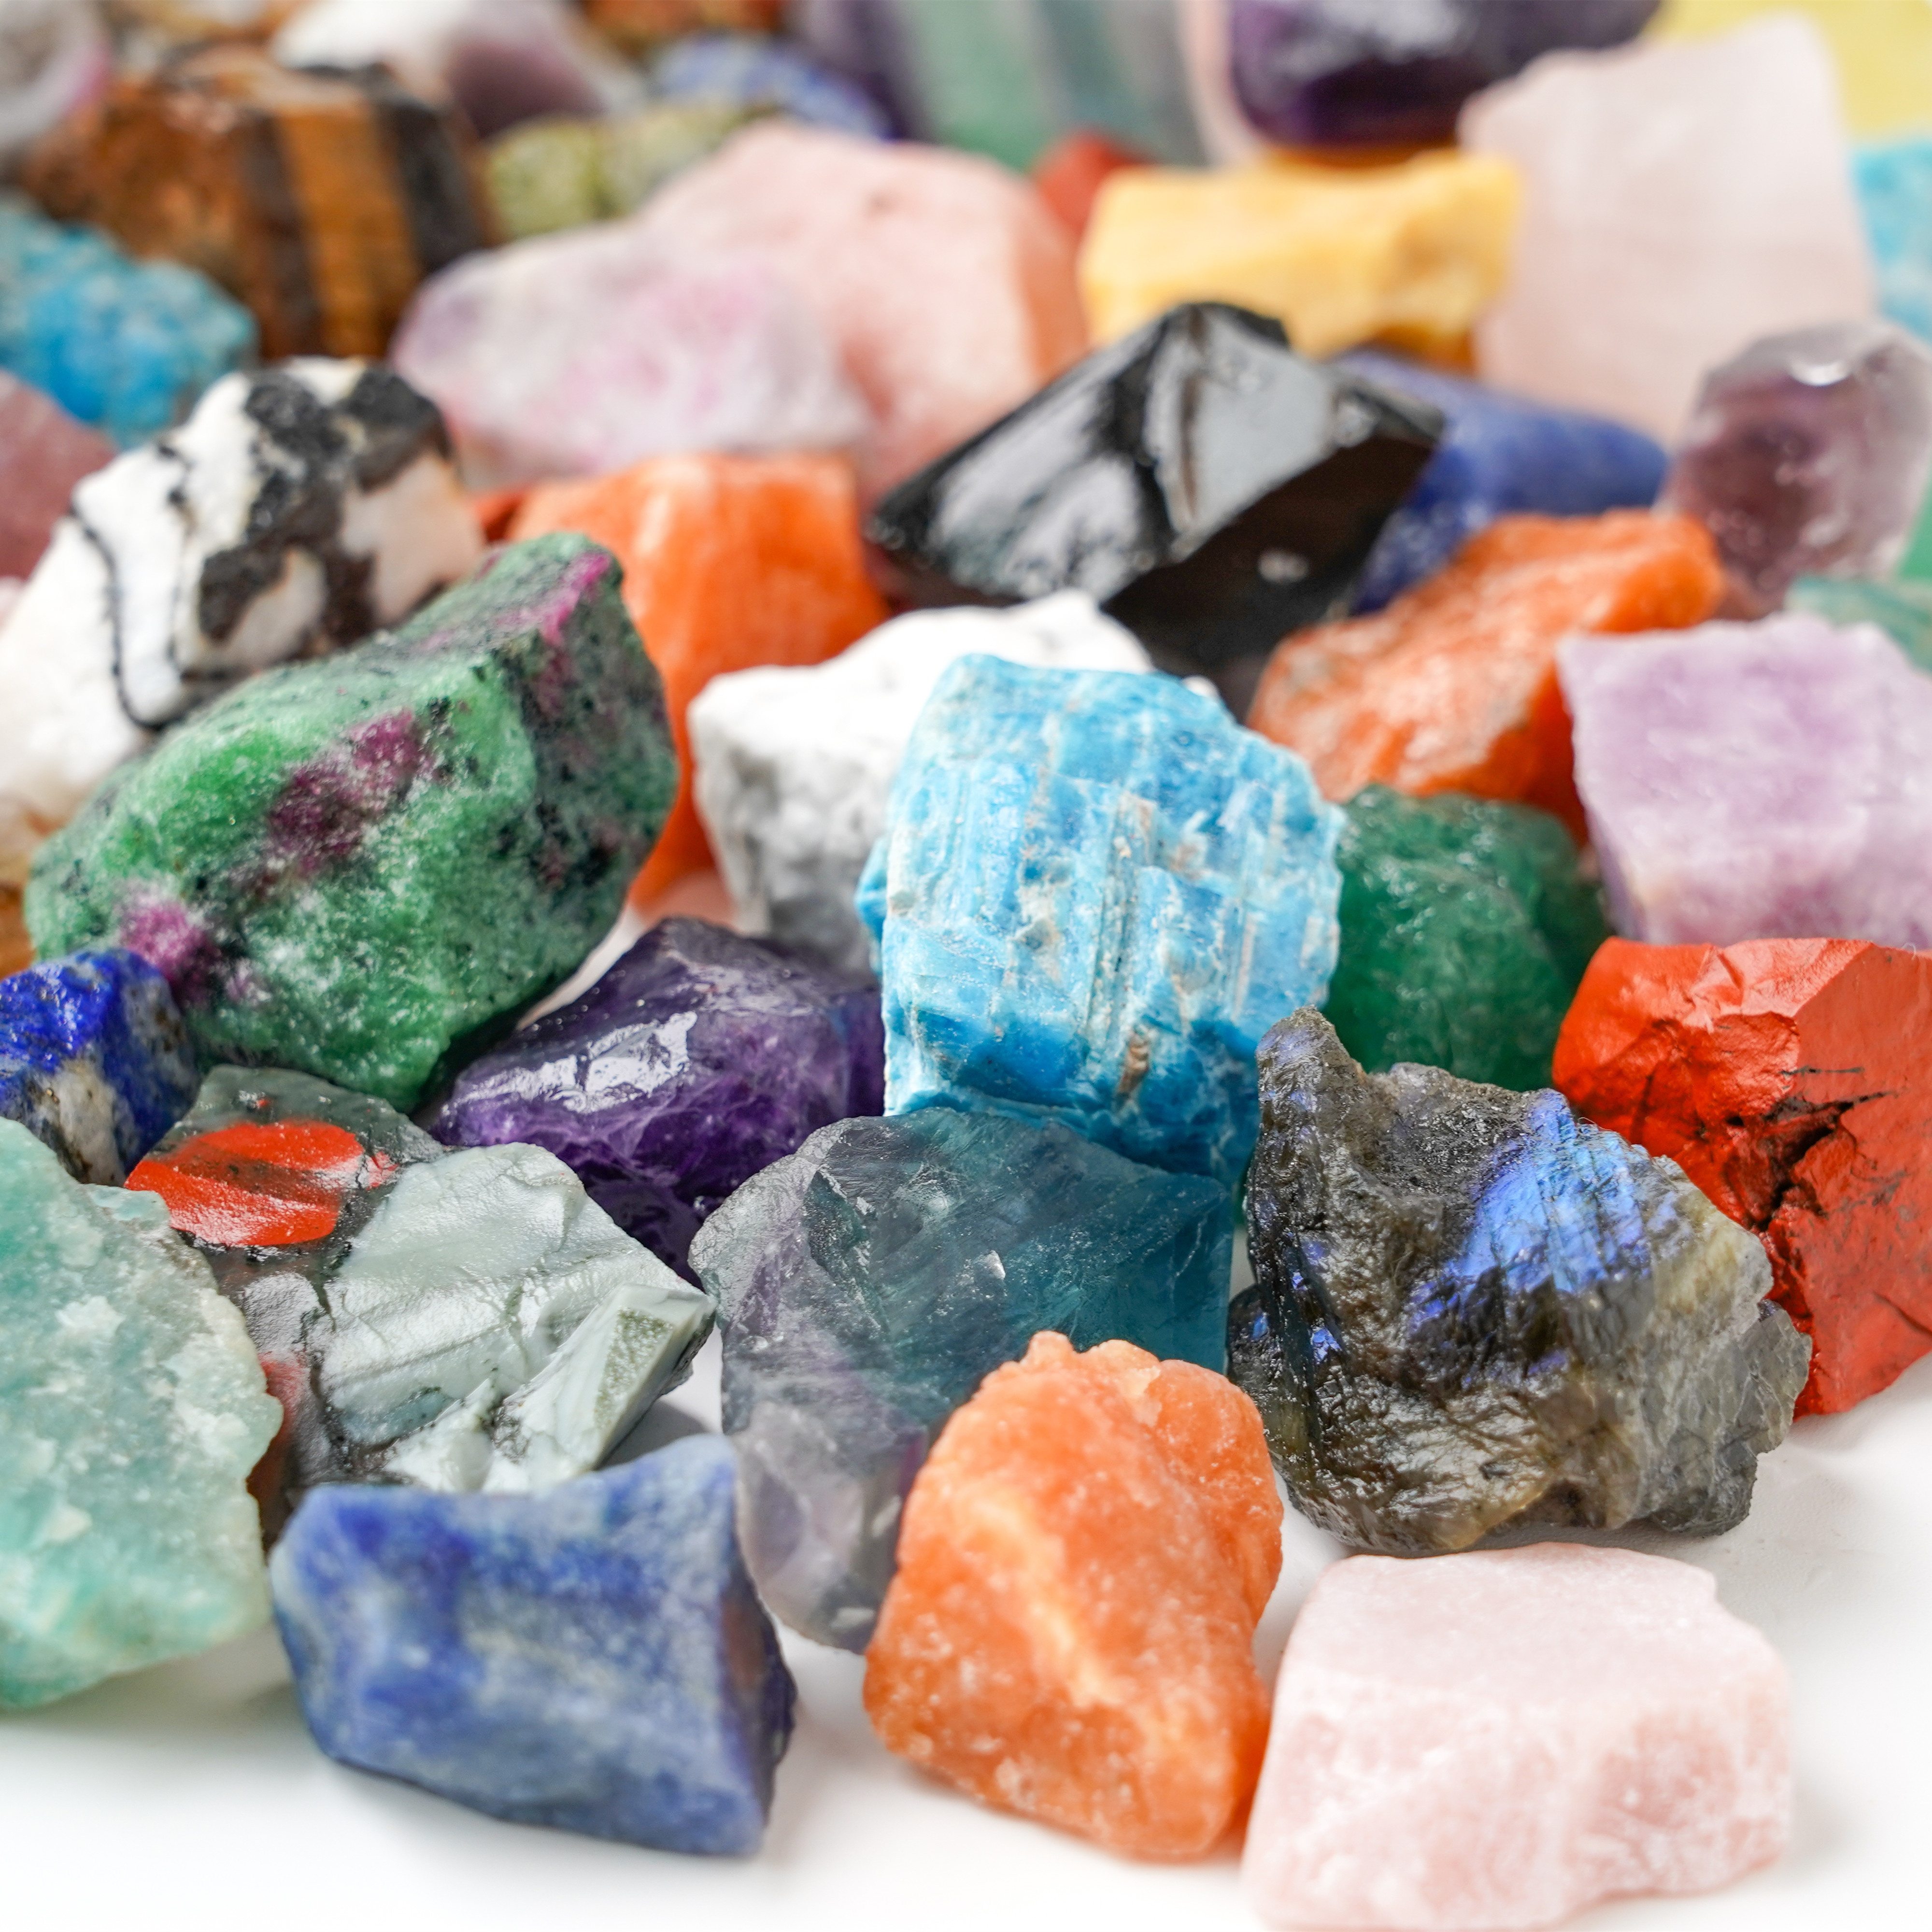 1.1lb Large Size Natural Mixed Crystal Chips Stones- Mixed Healing Crystal Chakra Stones, Crushed Crystal Mixed Gemstones for Crafts, Beautiful